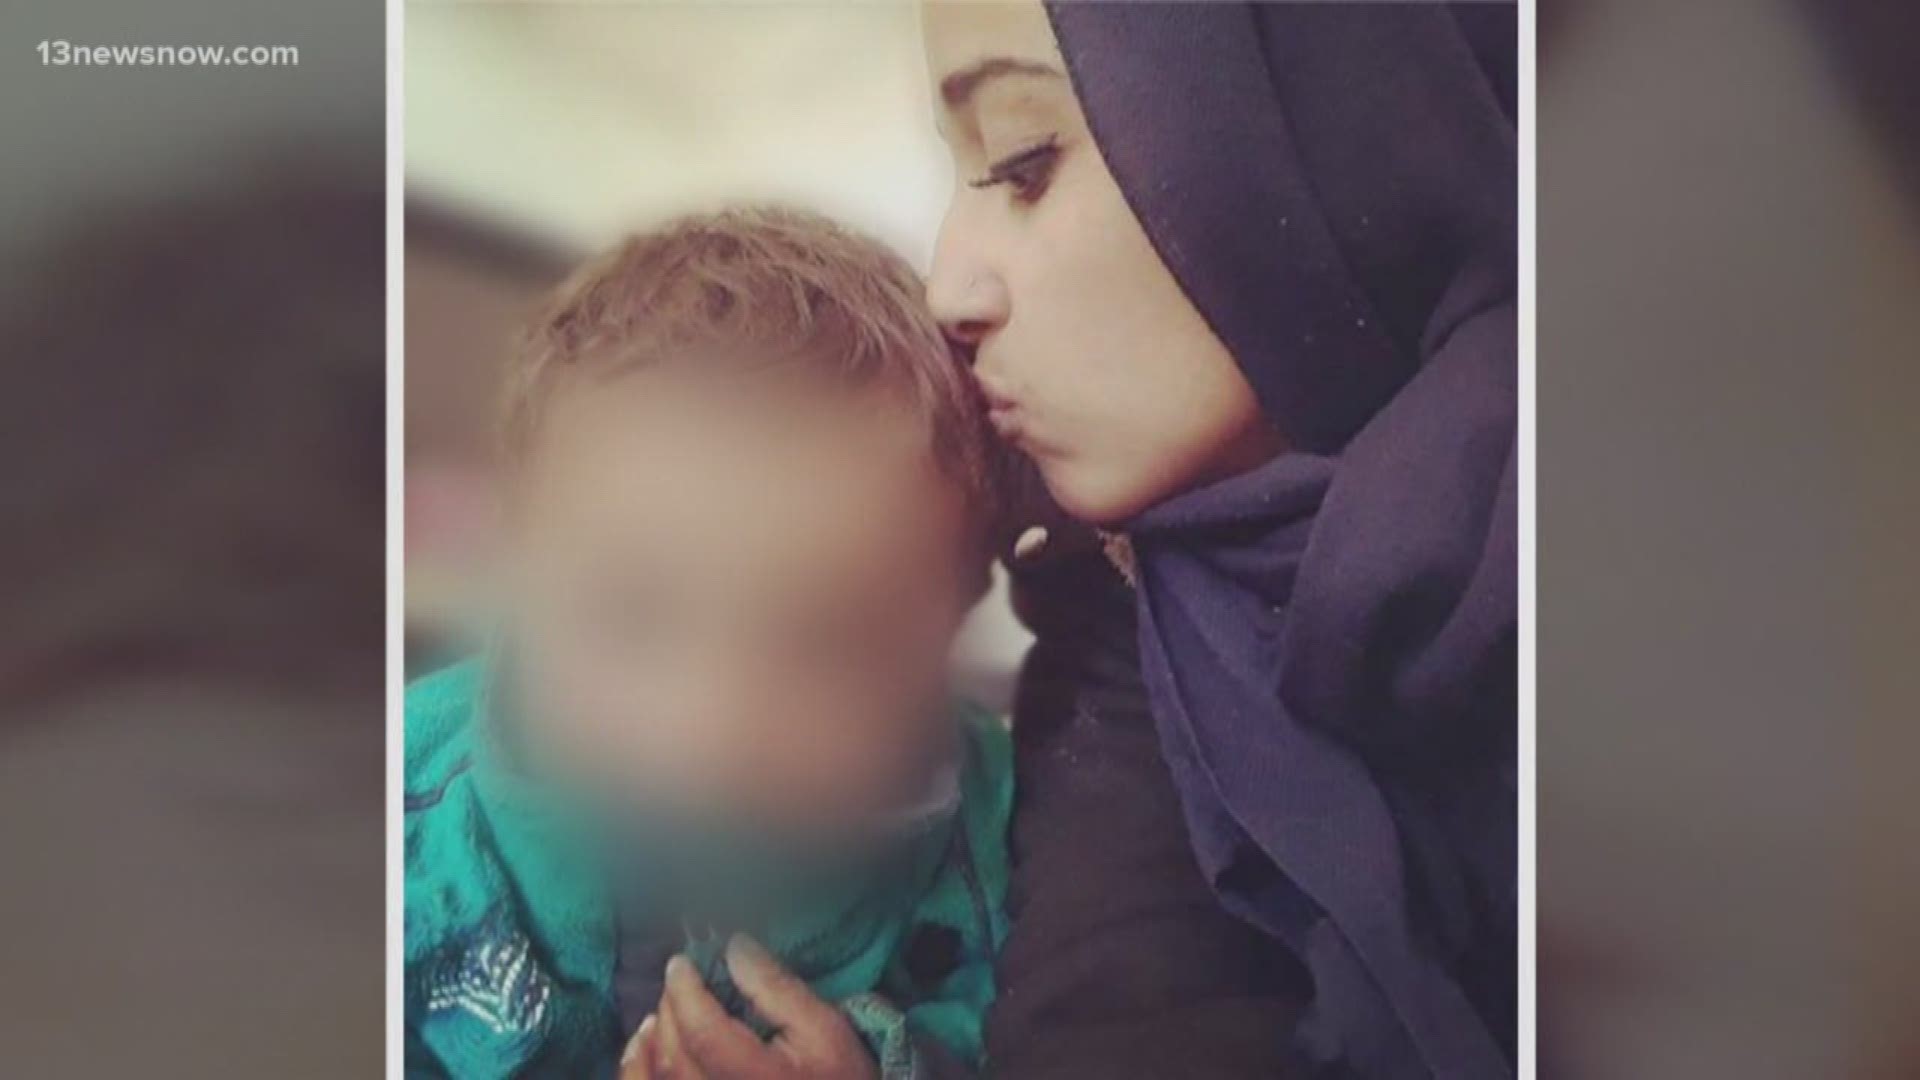 She left her family in Alabama to marry an ISIS fighter when she was a teenager. Now Hoda Muthana is a mother and says she made a life-altering mistake.